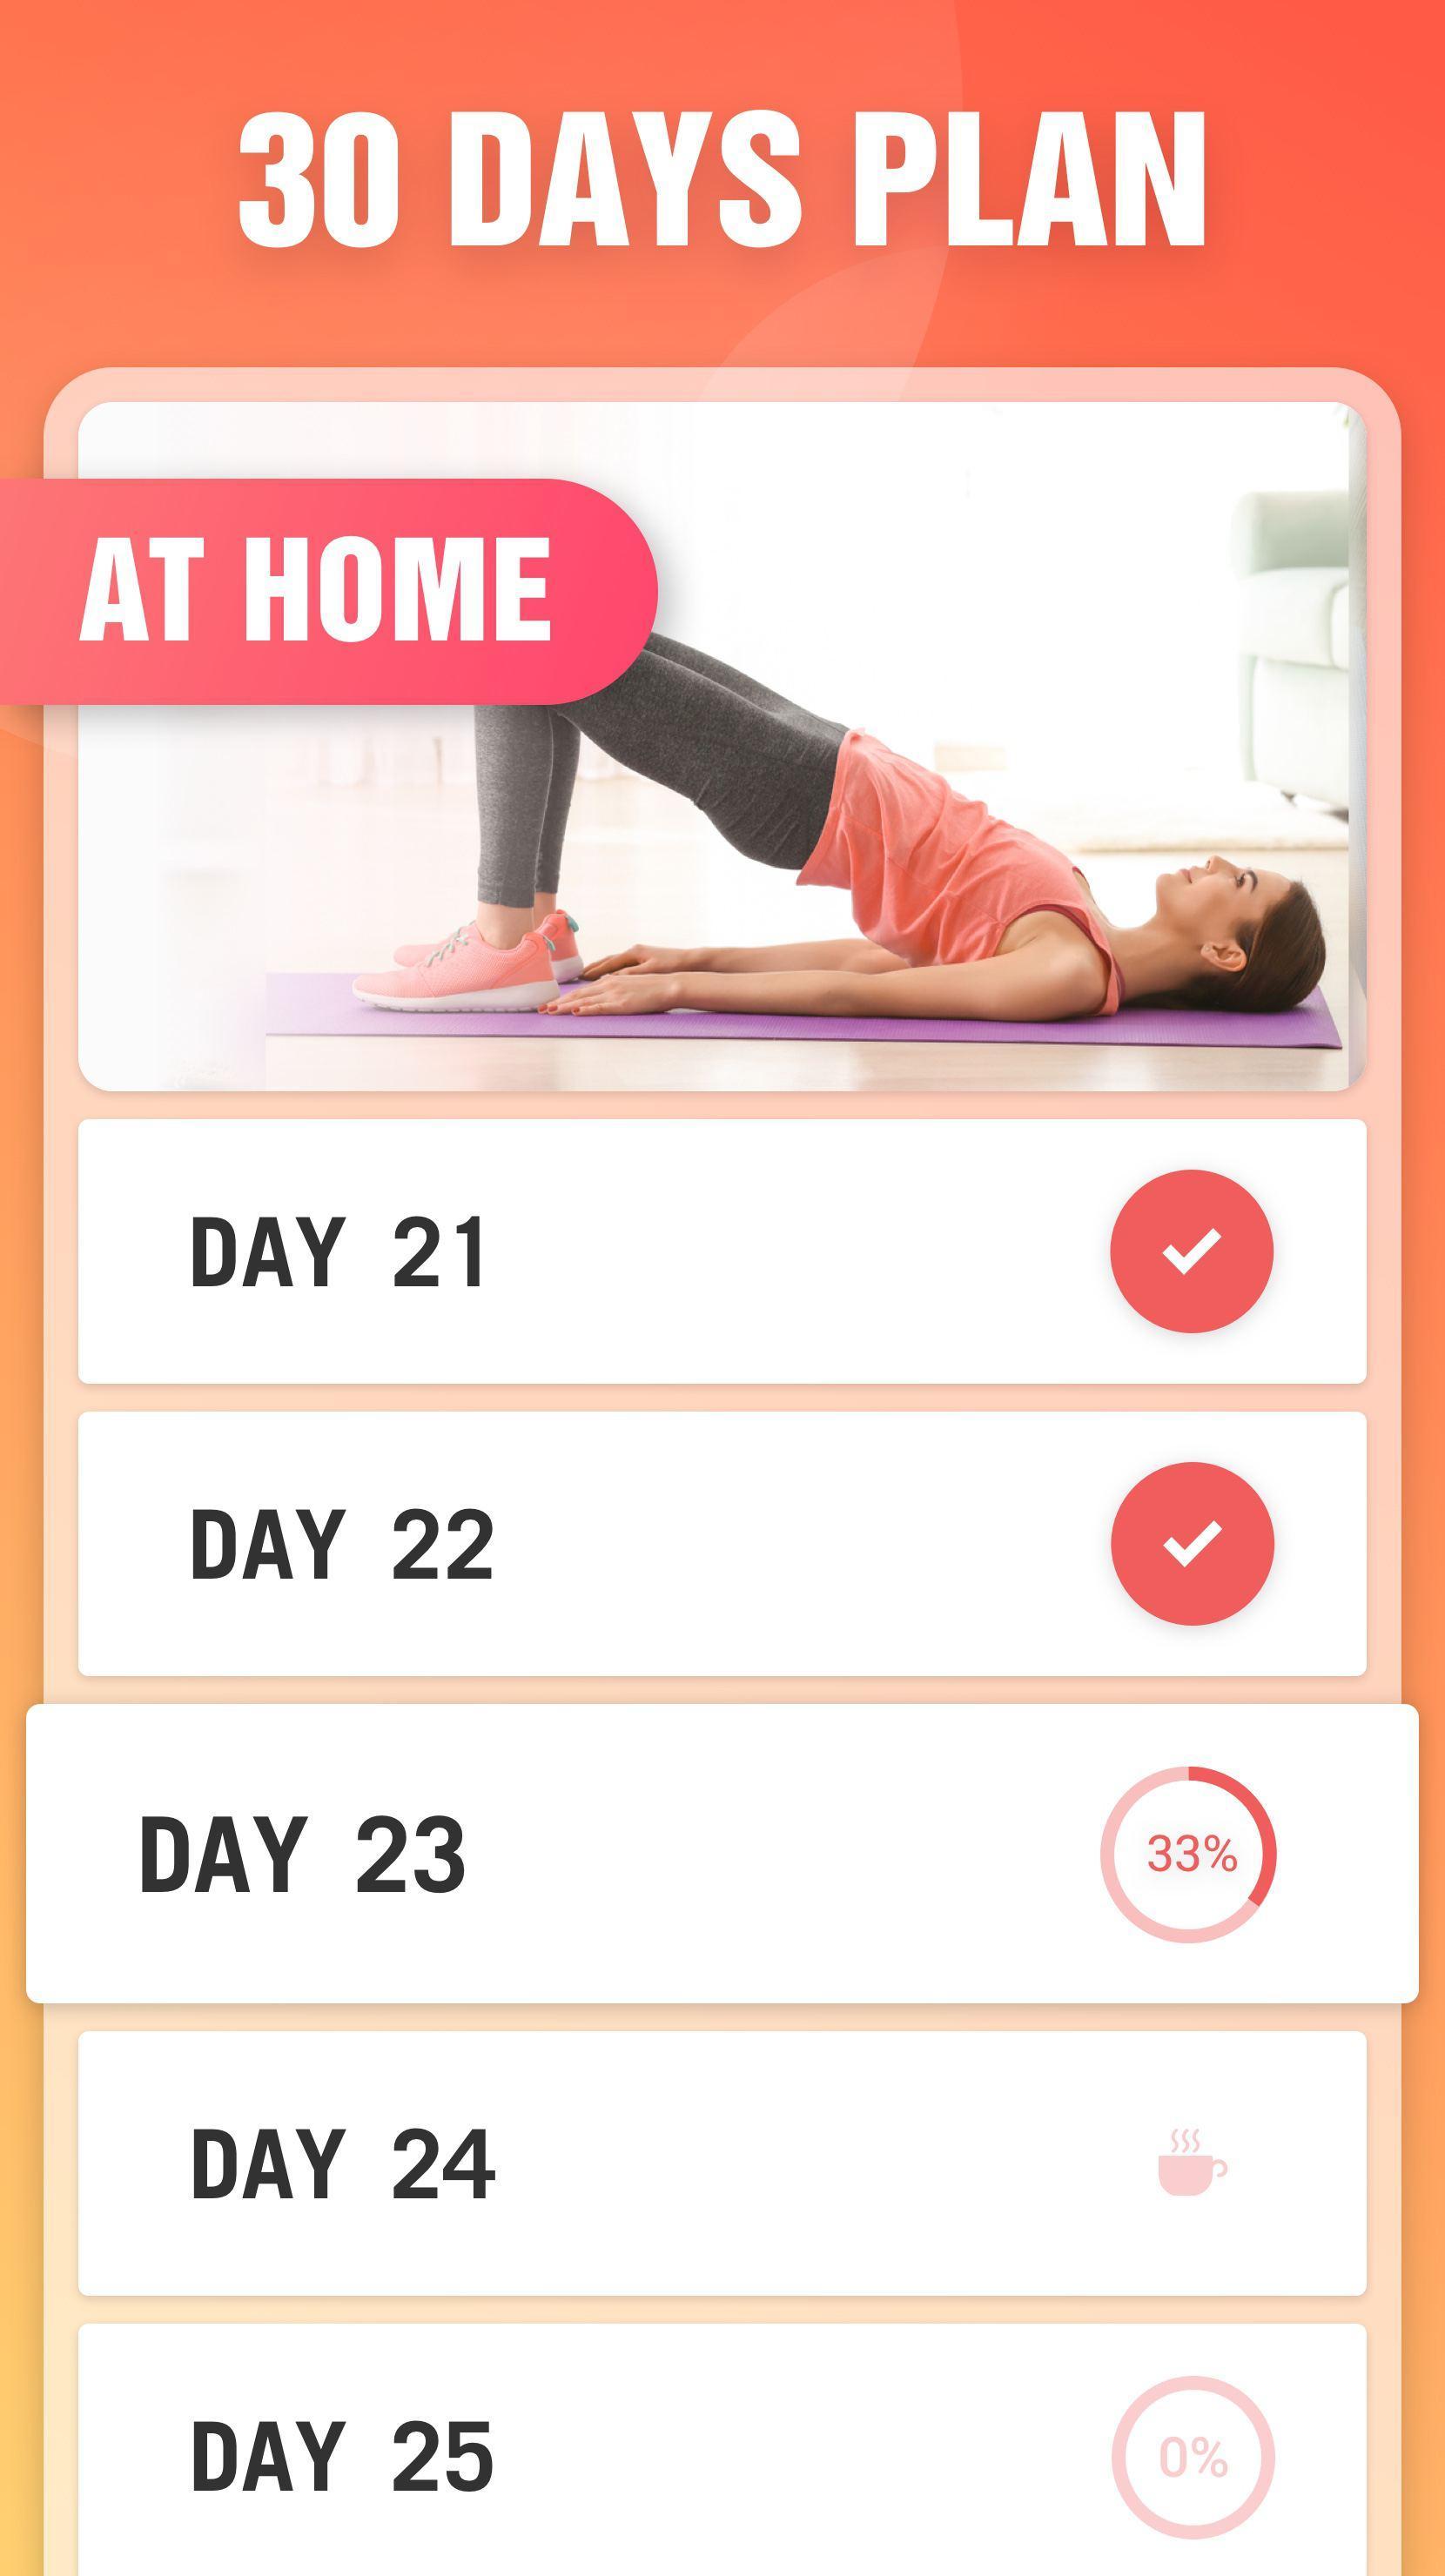 Lose Weight at Home - Home Workout in 30 Days 1.0.57 Screenshot 10